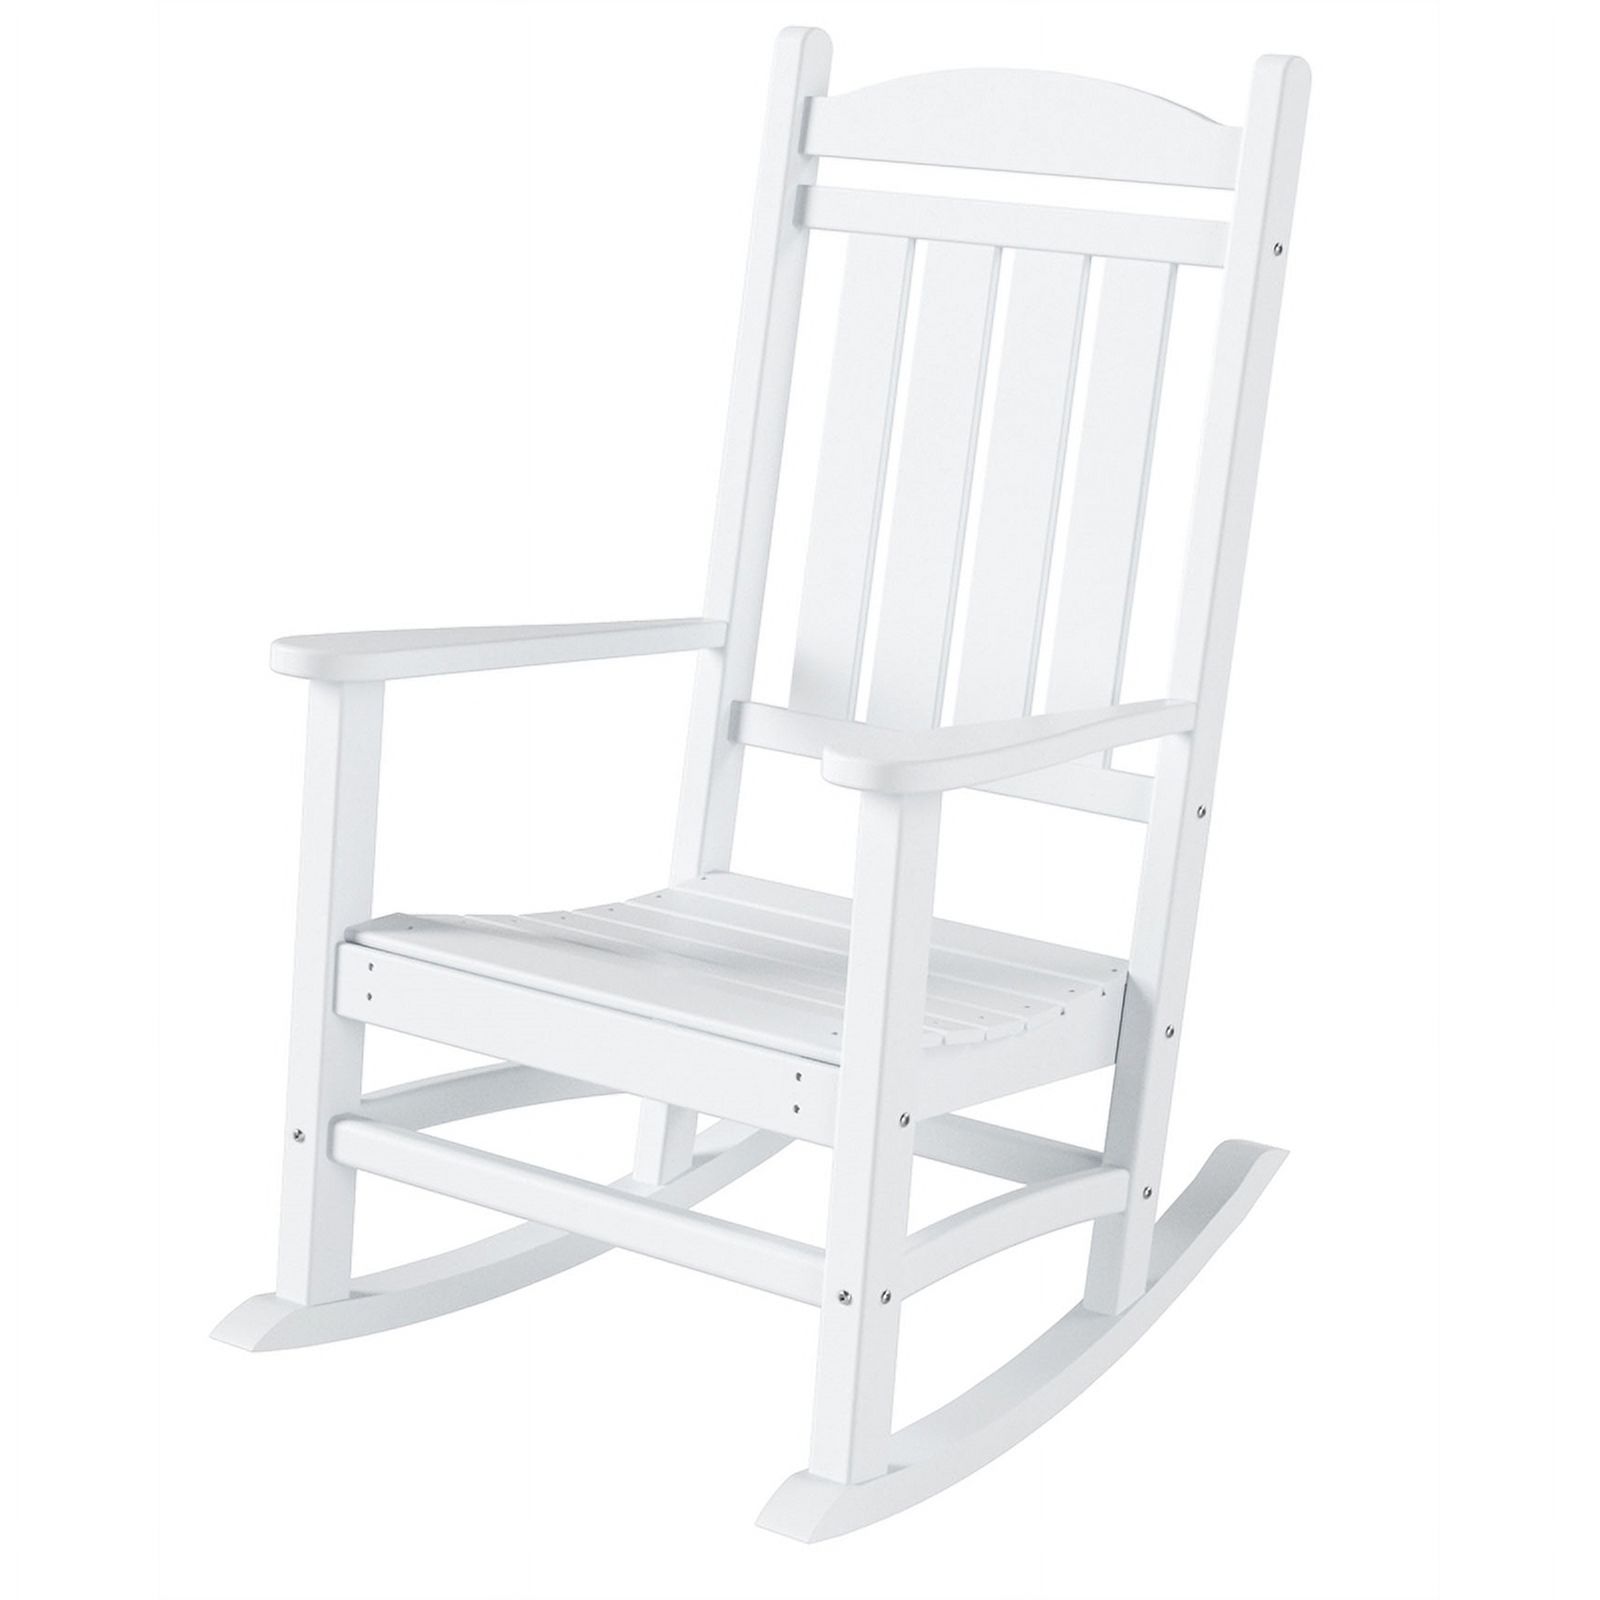 Hastings Classic Rocking Chair With Side Table 3-Piece Set - image 4 of 7